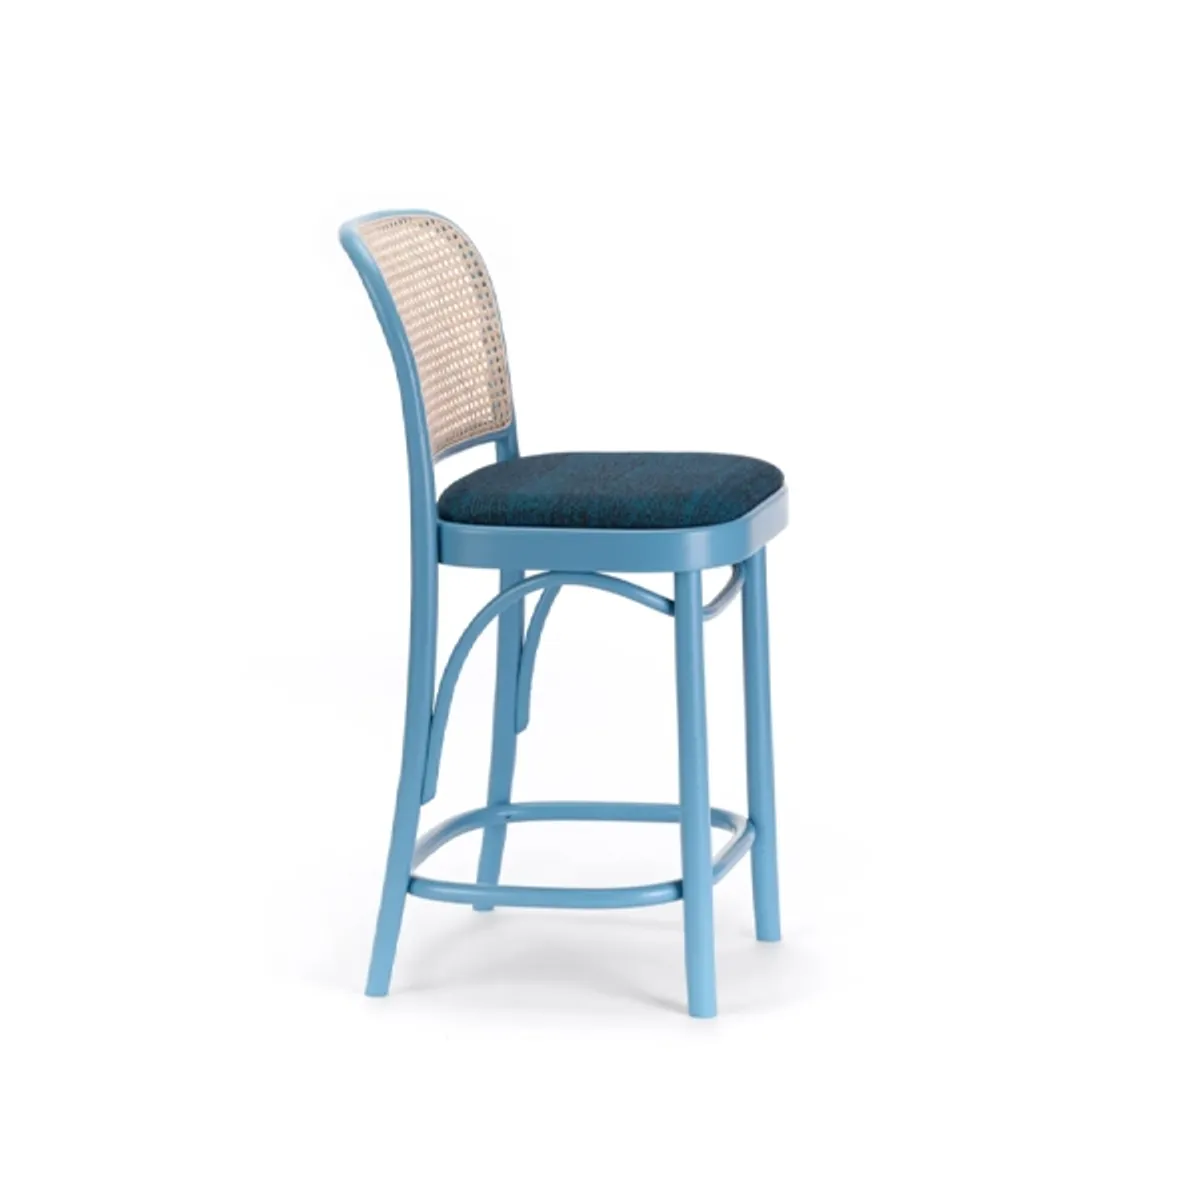 Bombay soft bar stool Inside Out Contracts2